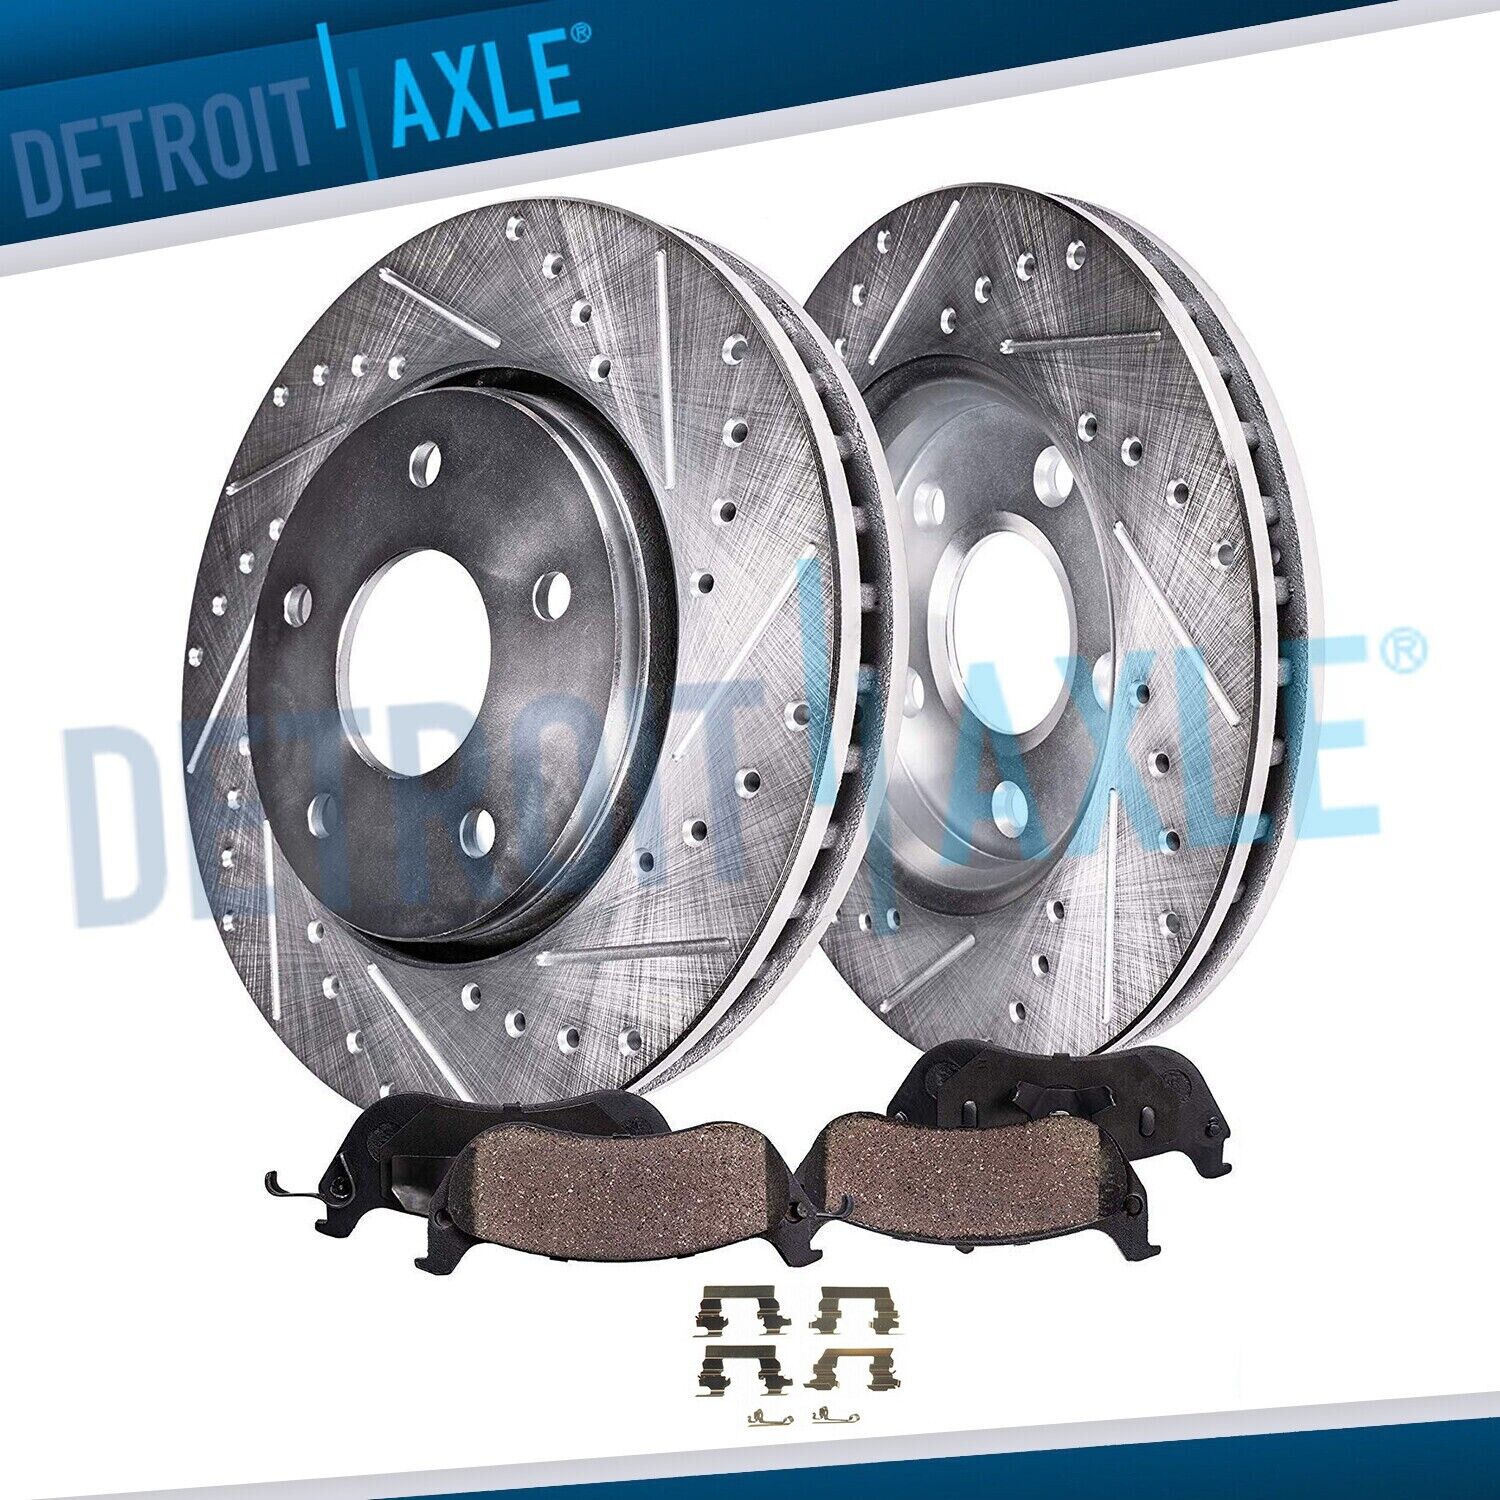 Front Drilled Rotors + Brake Pads for 2007 - 2010 Chevy Cobalt Pontiac G5 5LUGS